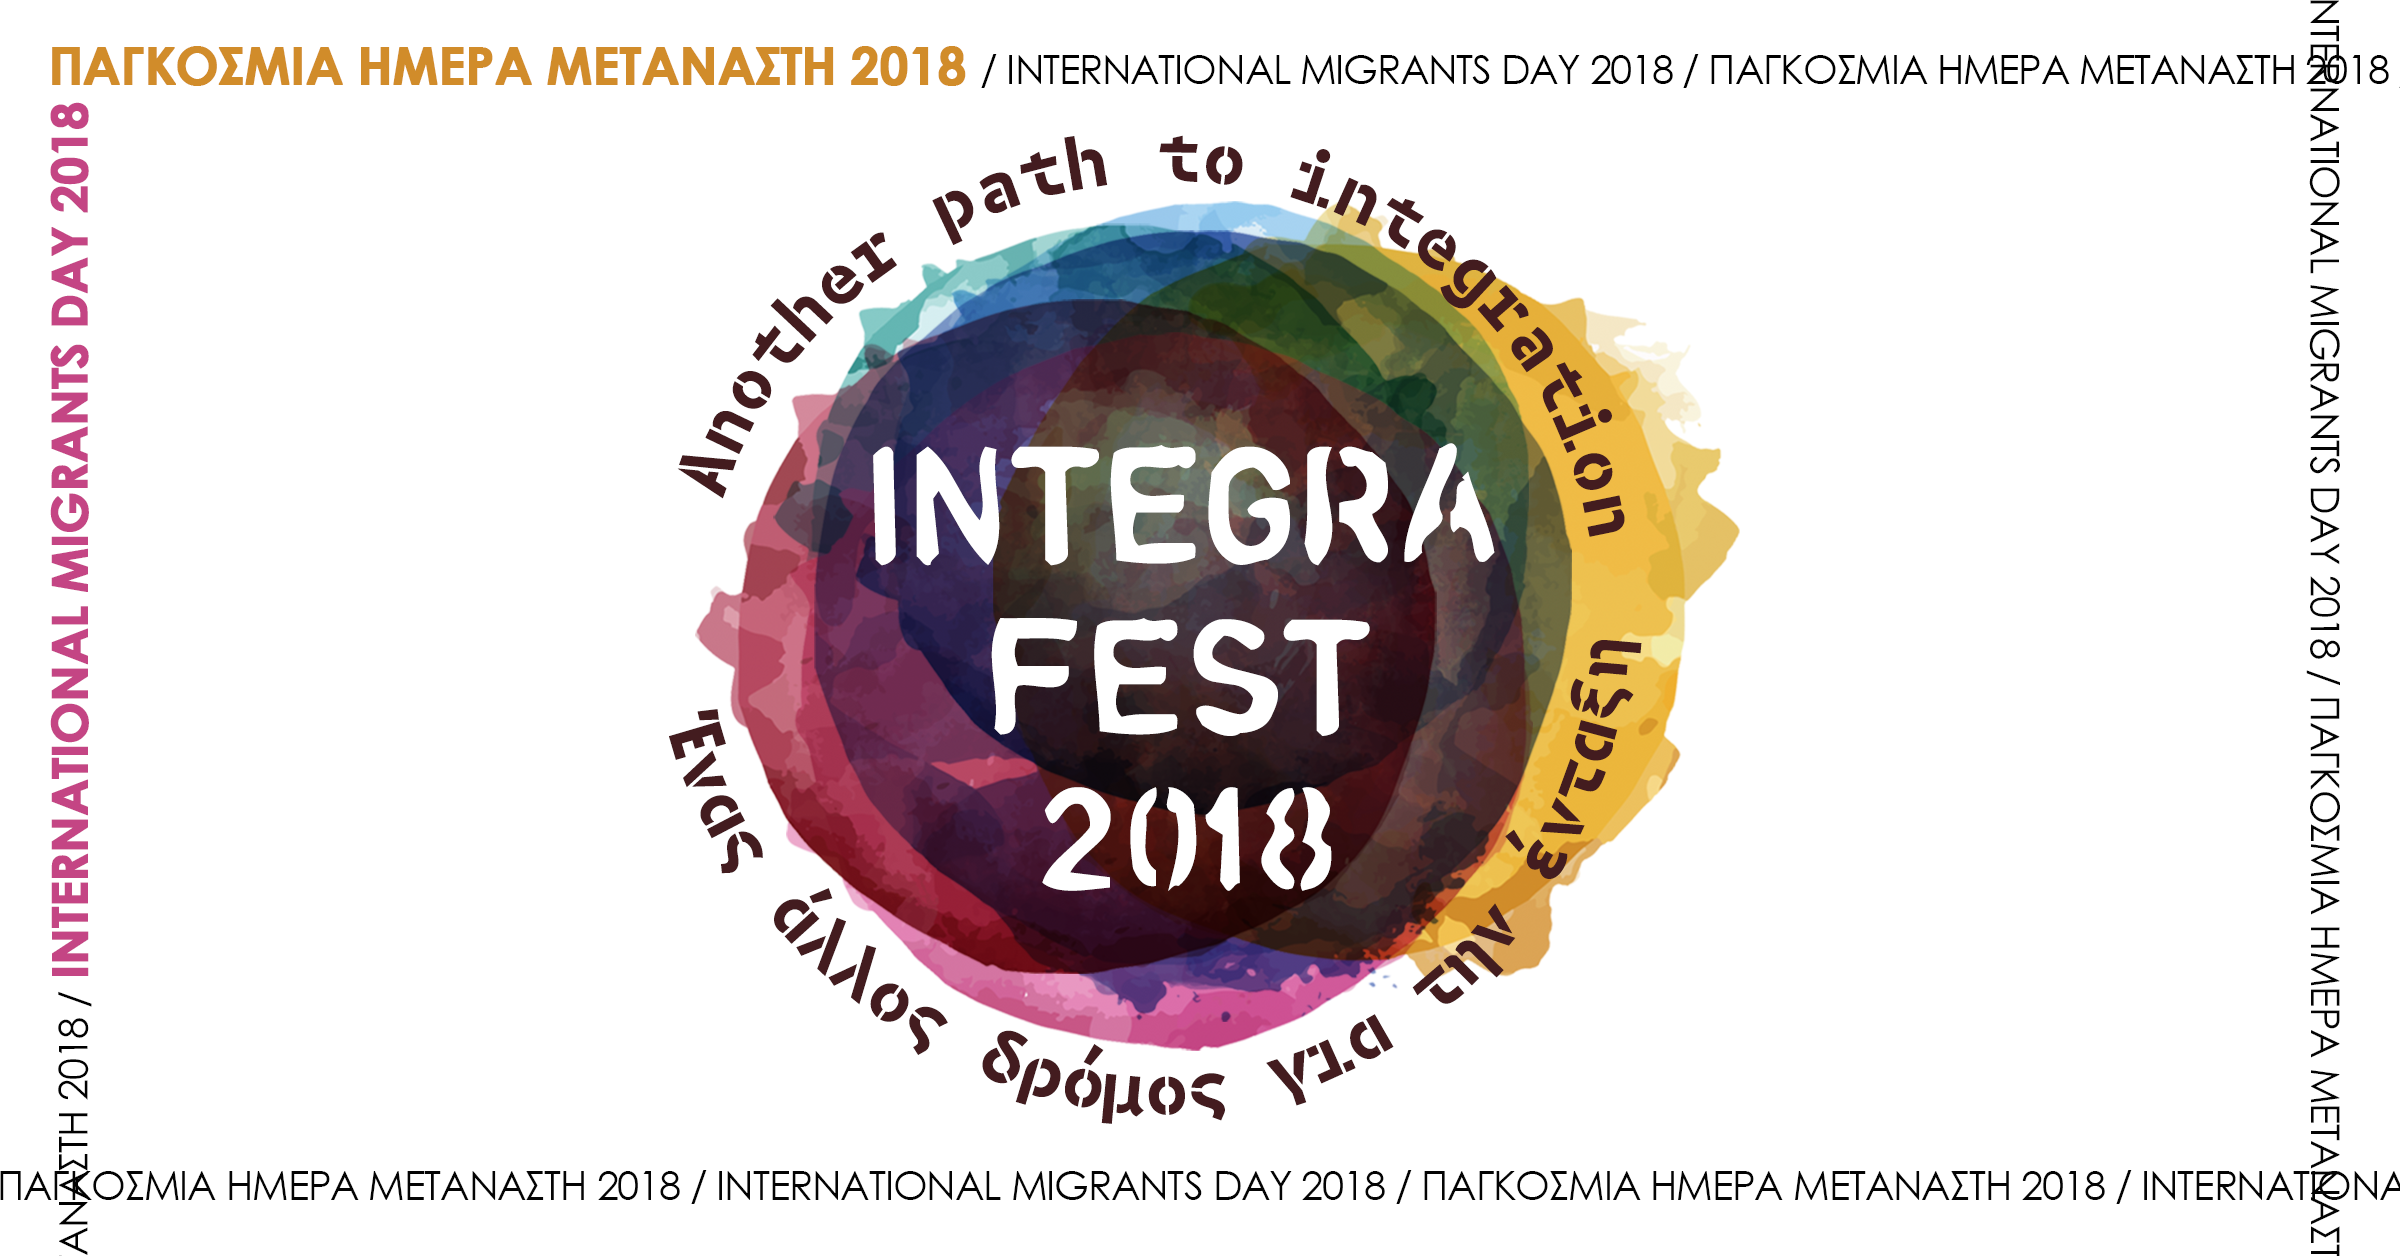 Integra Fest 2018 / Another Path to Integration